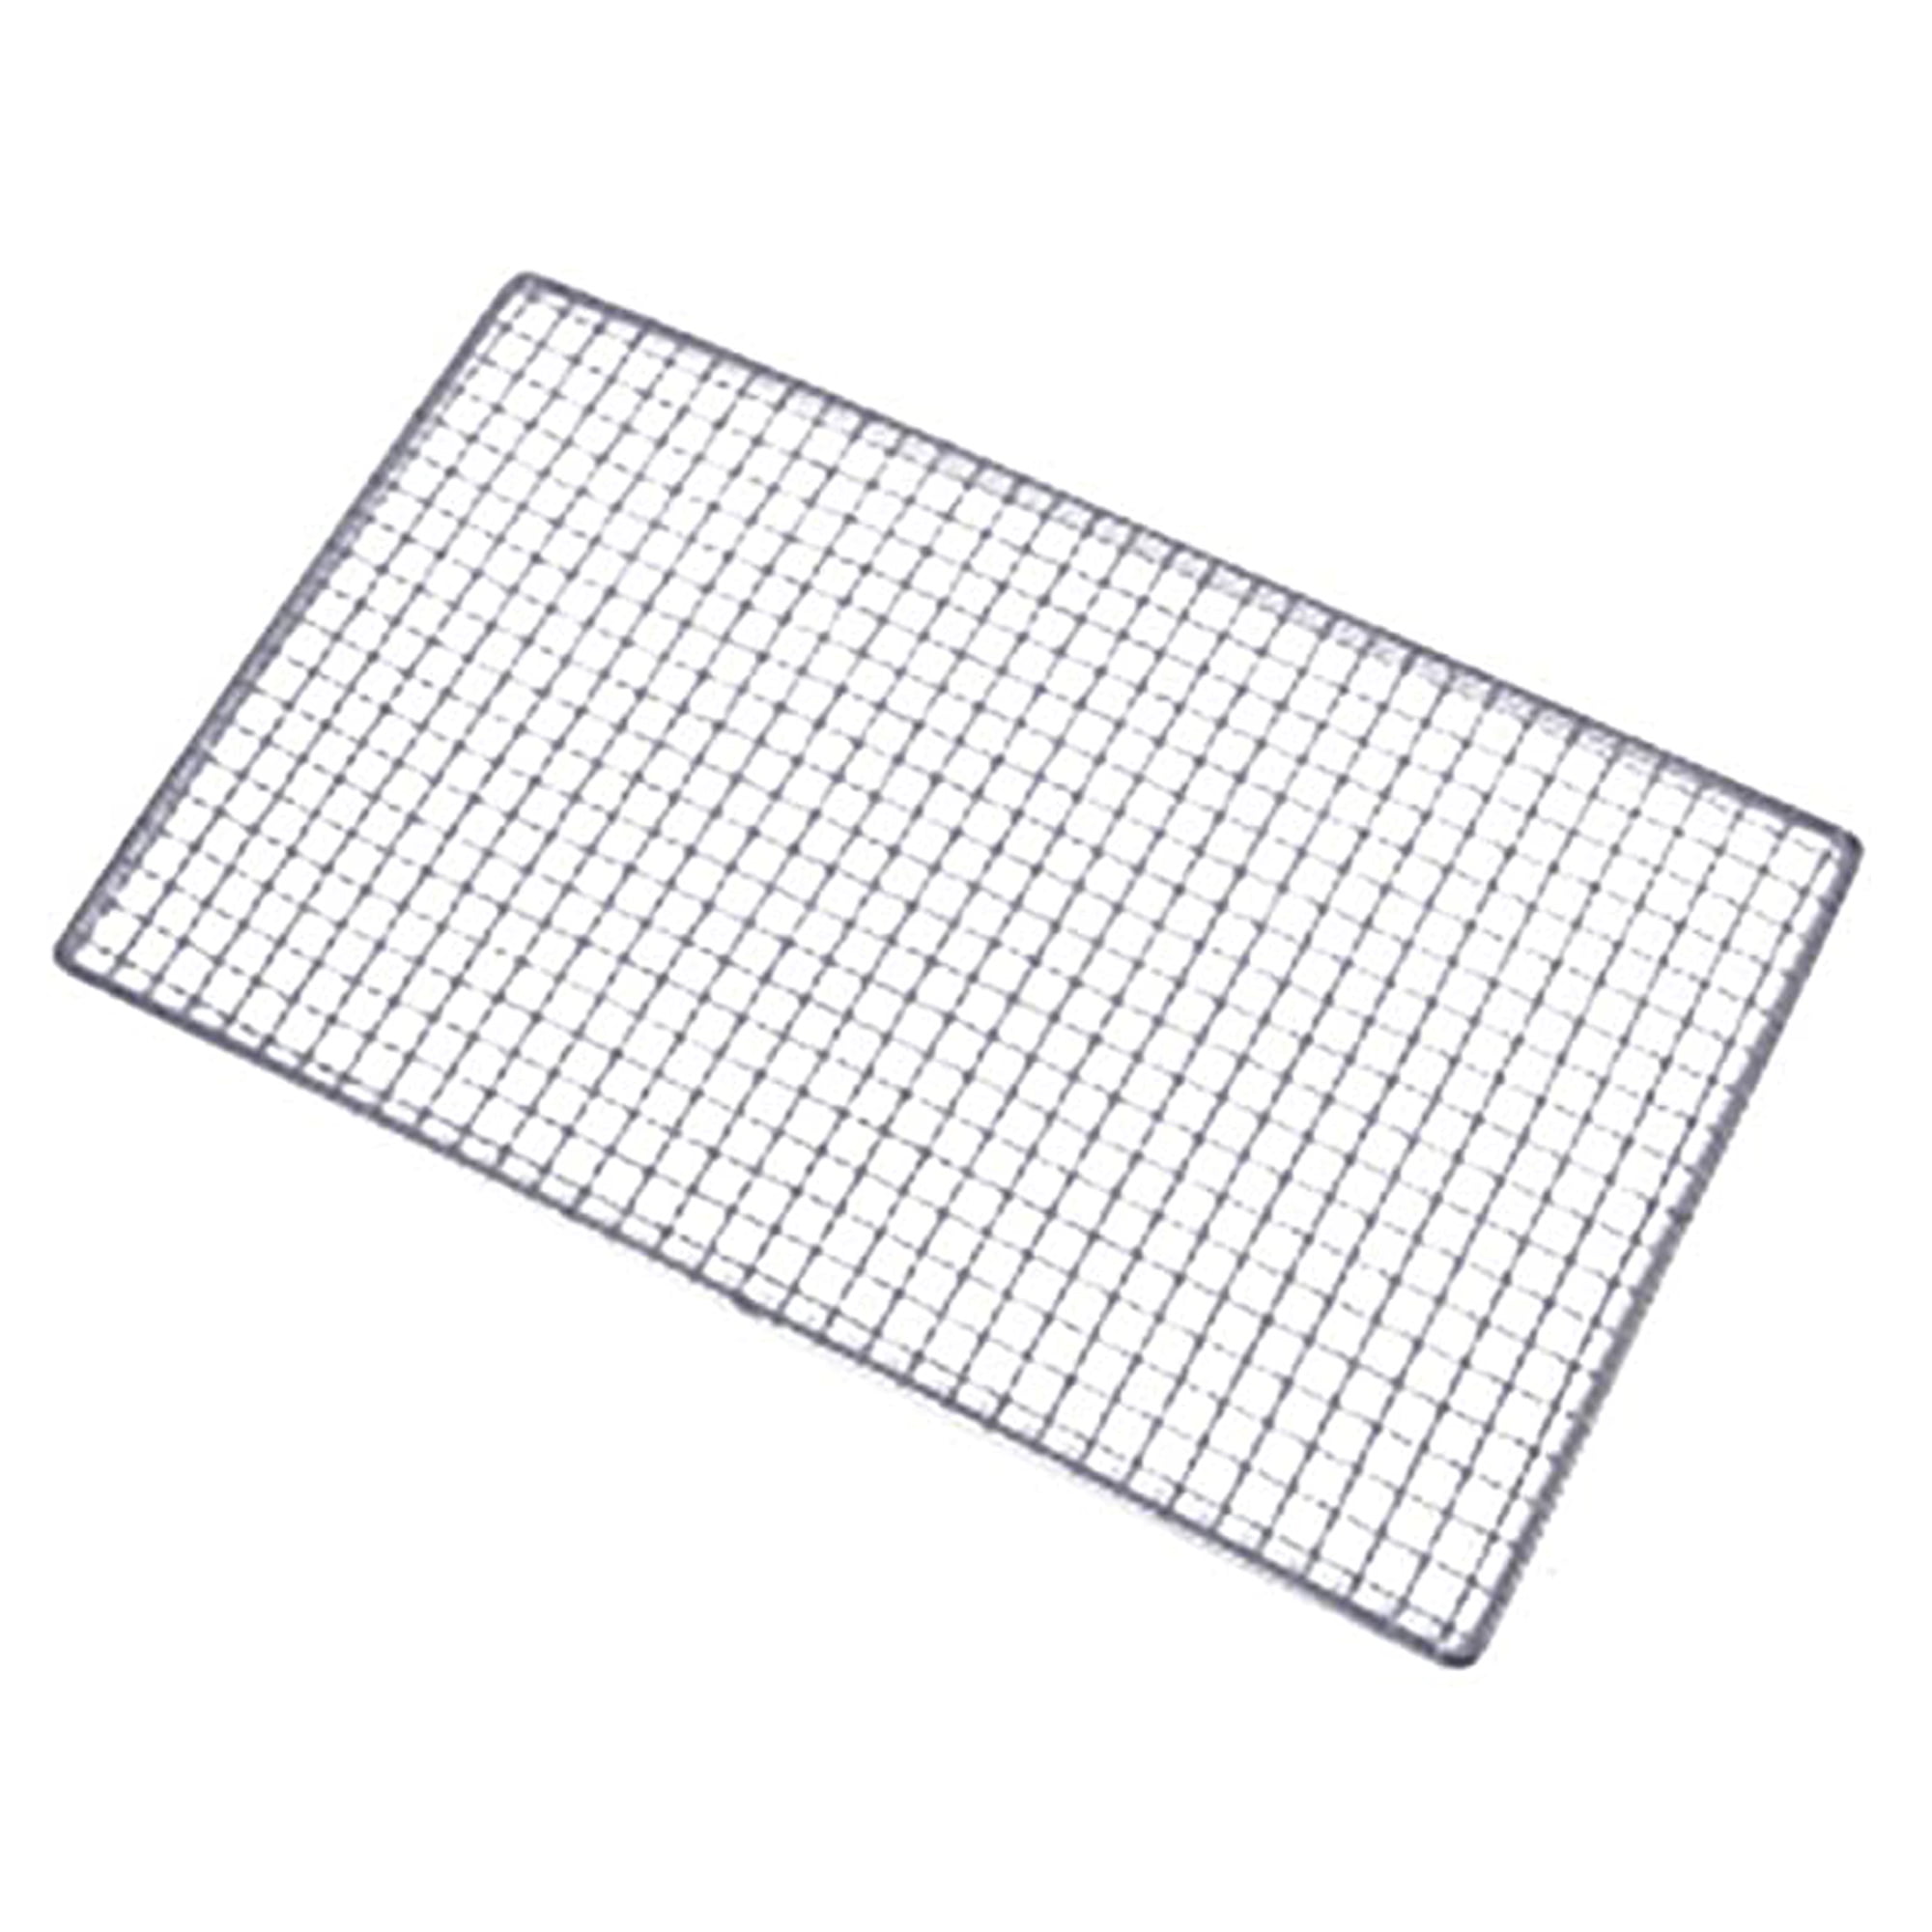 Stainless Steel Grill Mesh Mat Pot Rack Portable Barbecue Mesh Net Square 